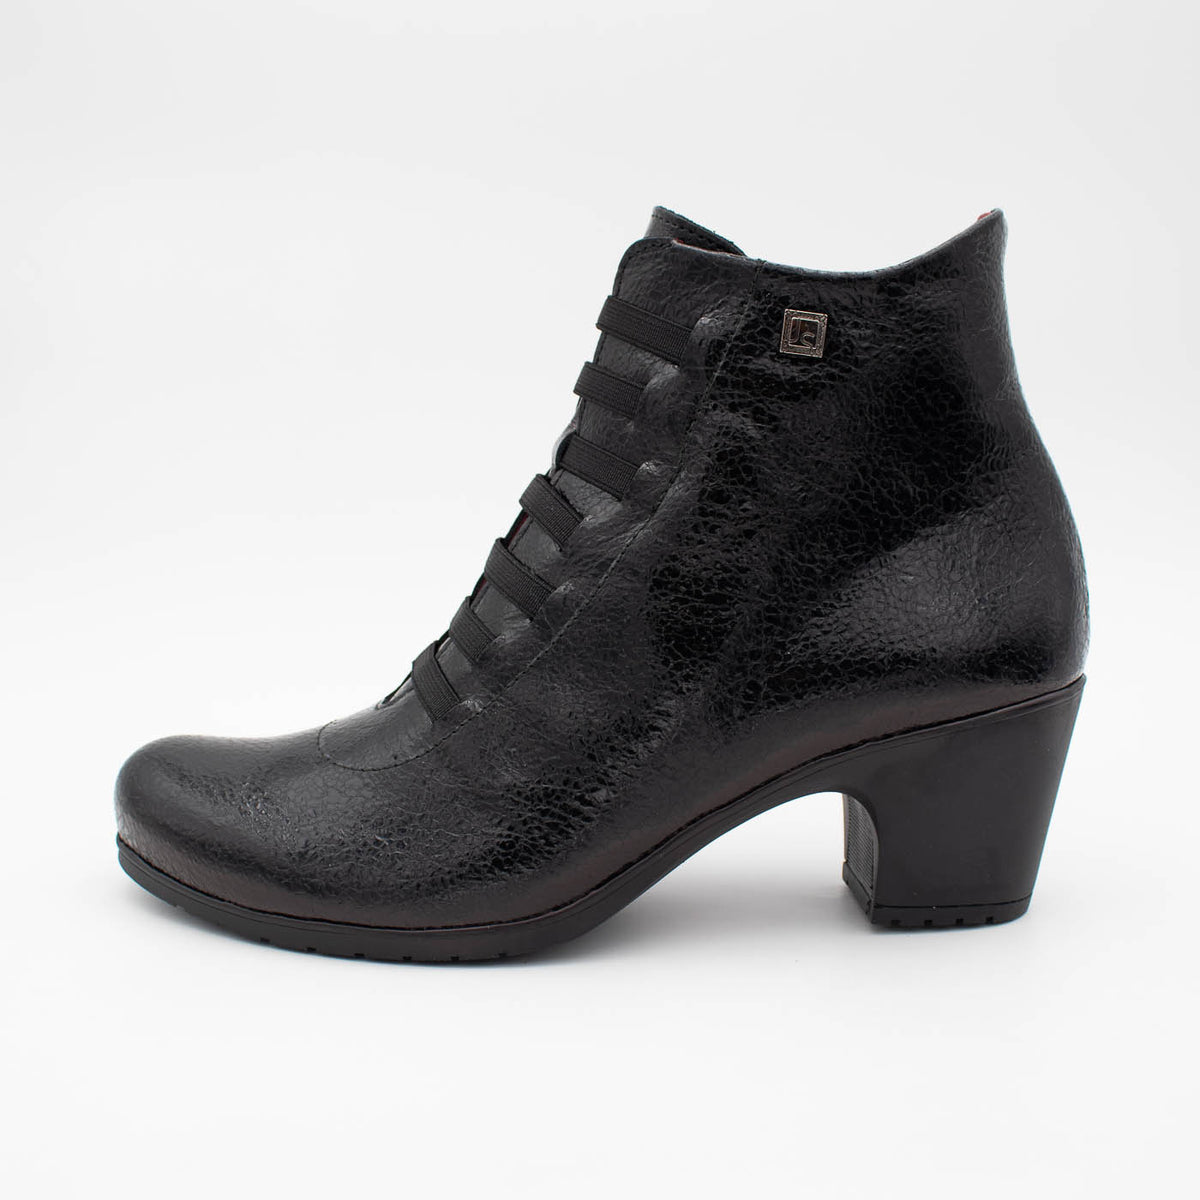 Classic profile of Jose Saenz black ankle boot.